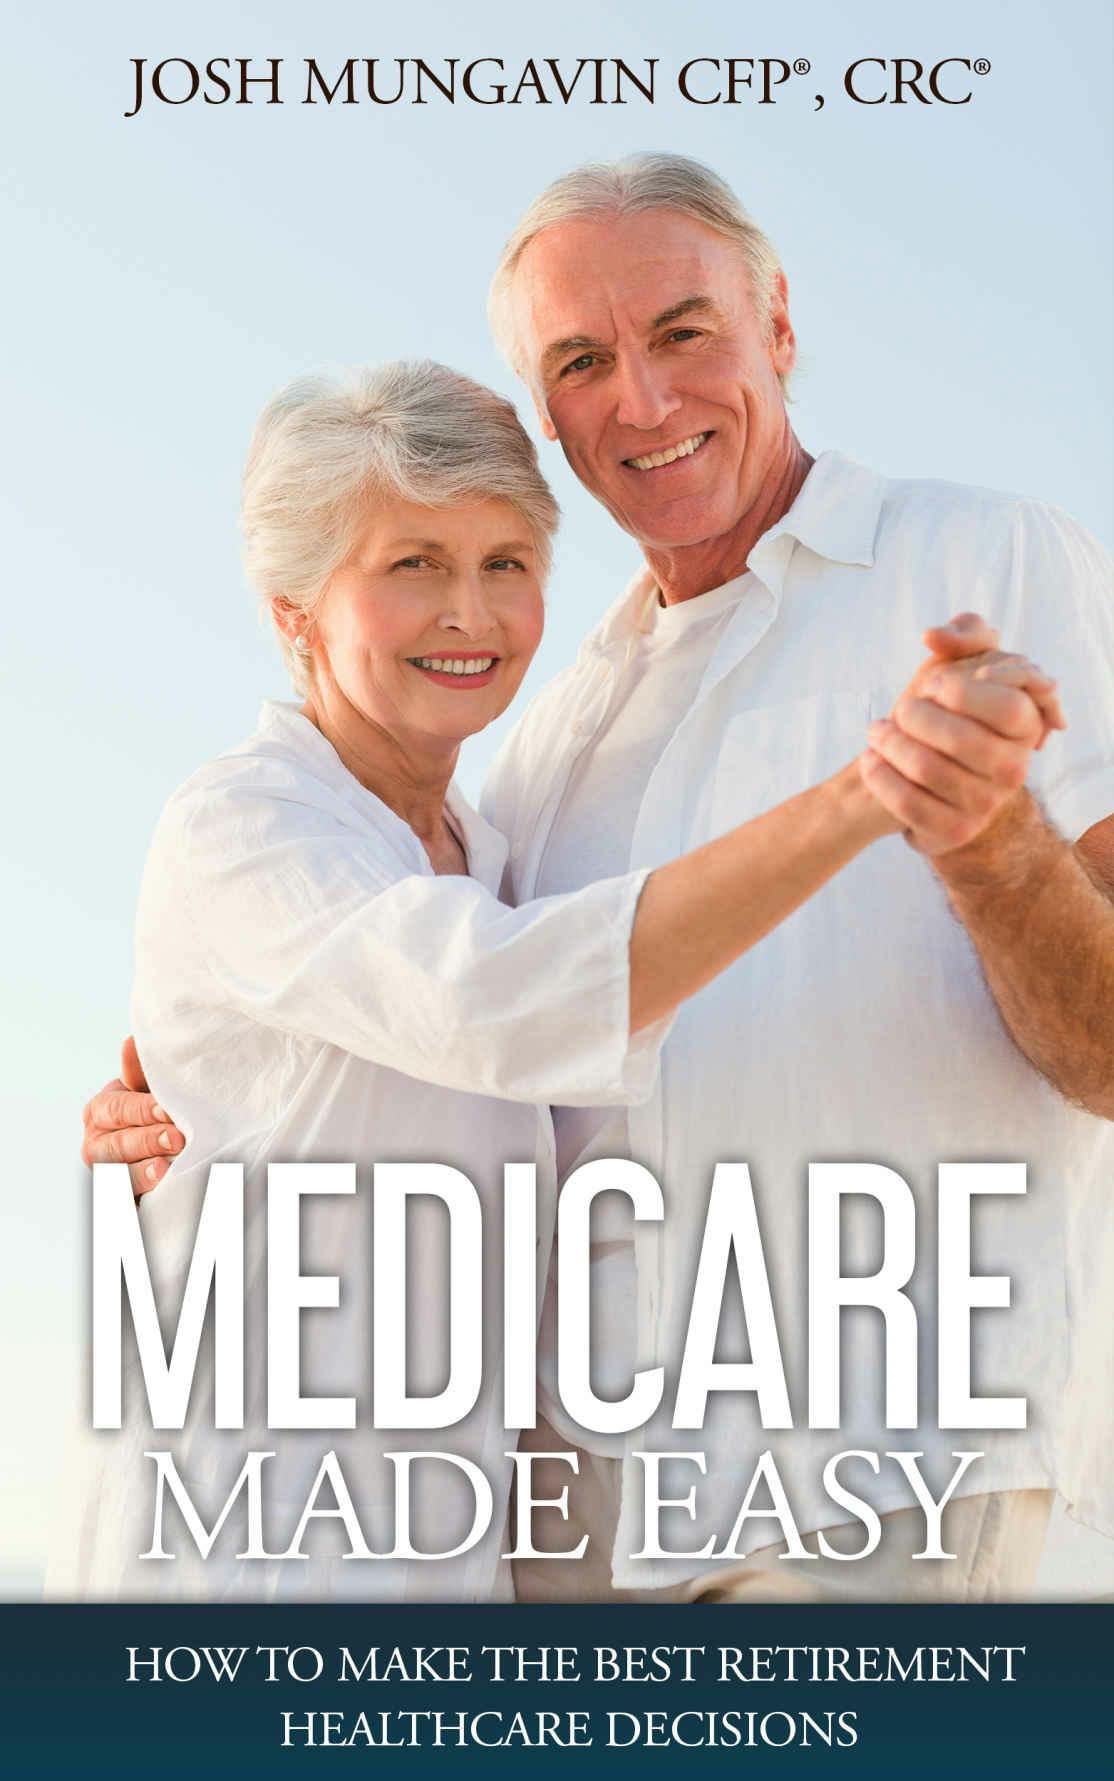 Medicare Made Easy: How to Make the Best Retirement Healthcare Decisions